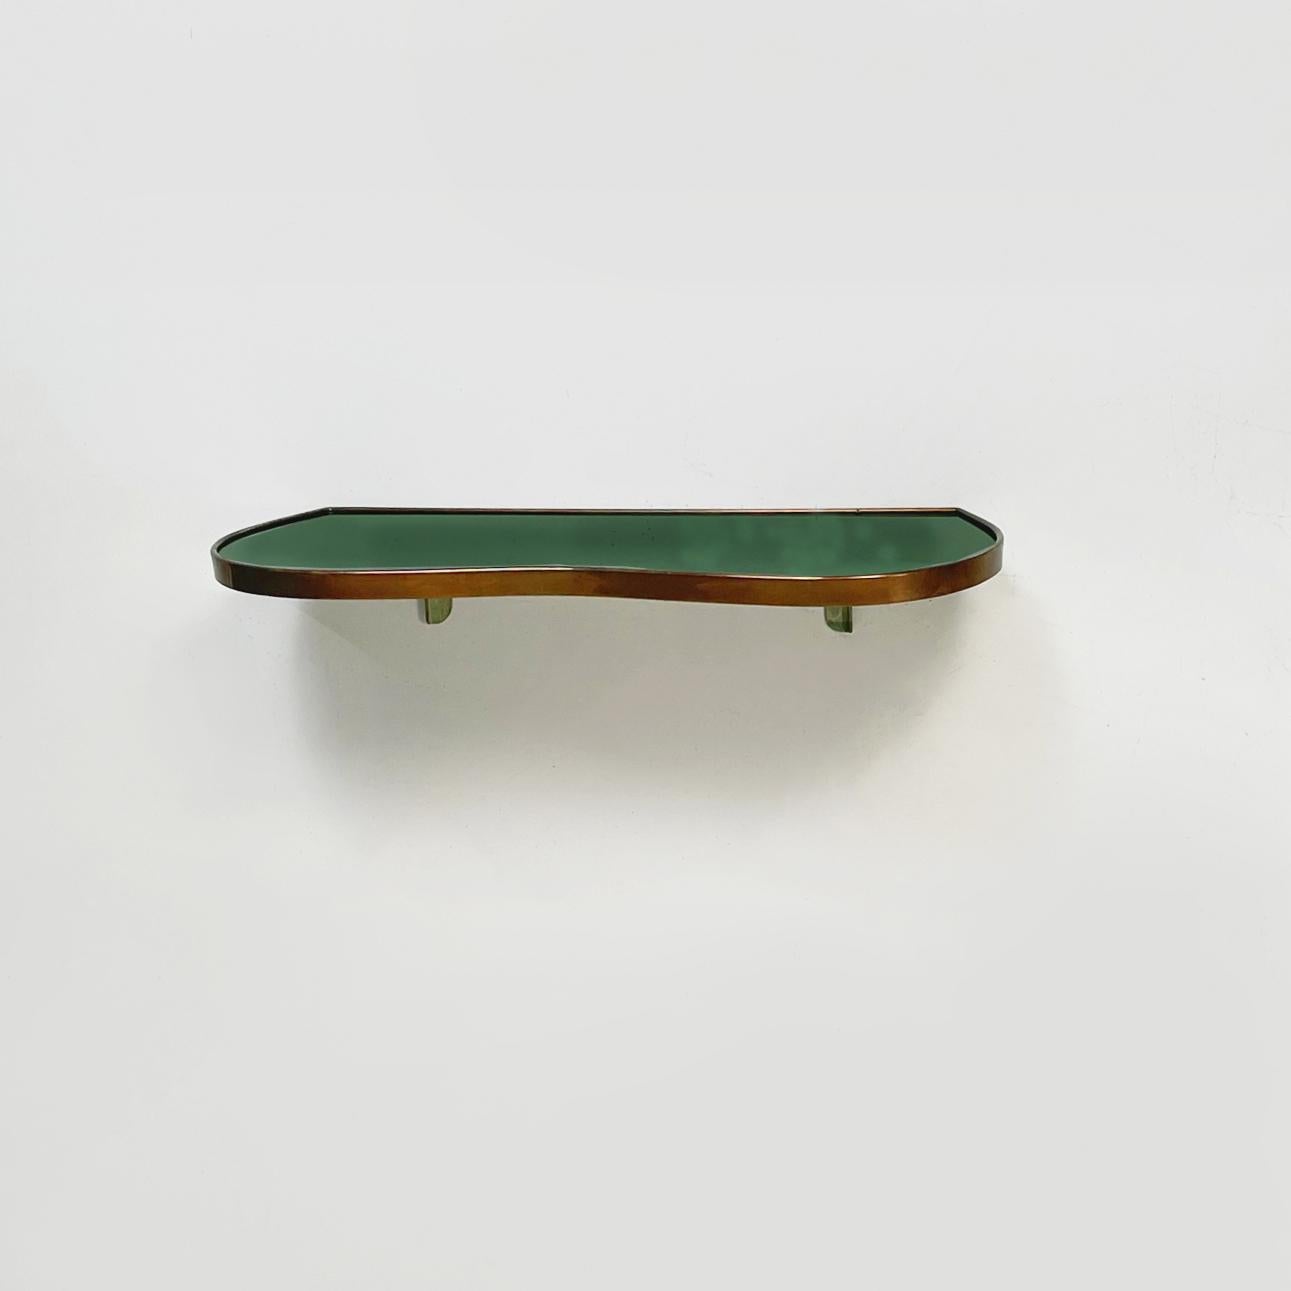 Italian Mid-Century Modern irregular shelf in green glass and brass, 1950s
Irregular rounded shelf in forest green painted glass. The profile of the shelf and the brackets are in brass.
1950s
Very good conditions, brass with patina. The original